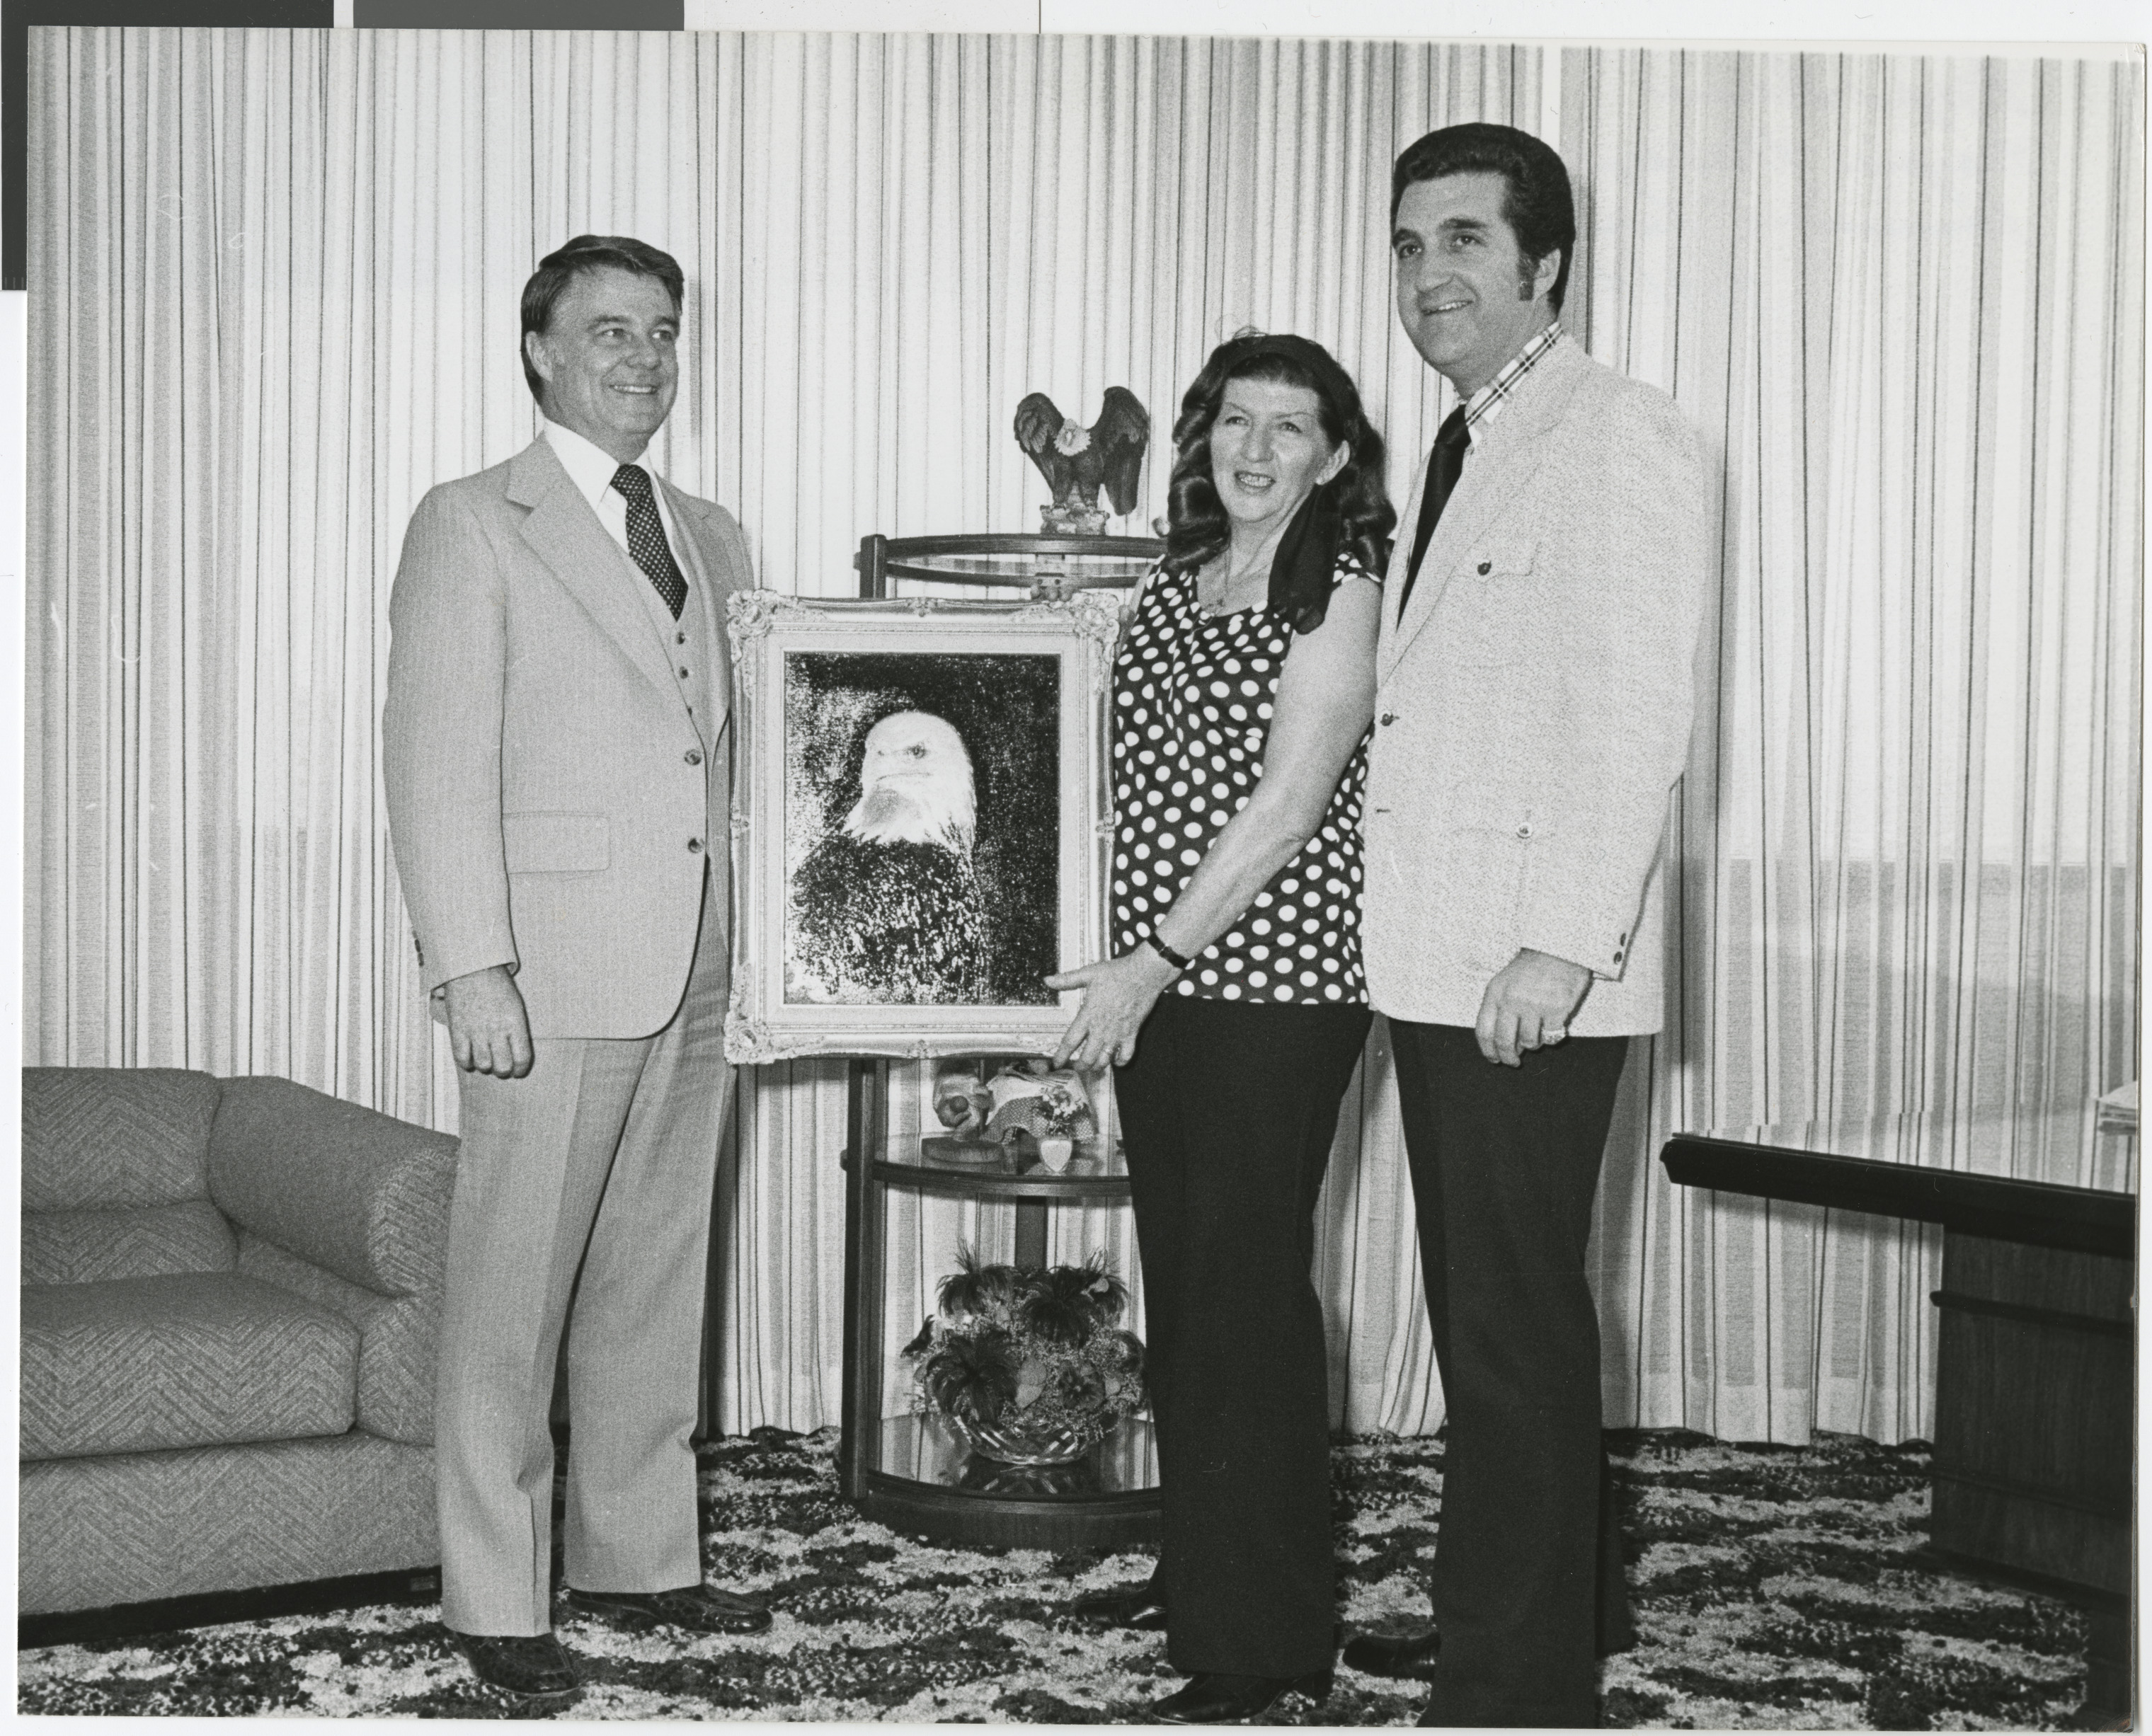 Photograph of Ron Lurie (right) with Bill Briare and Marjorie Madden with a painting of an eagle, April 4, 1977